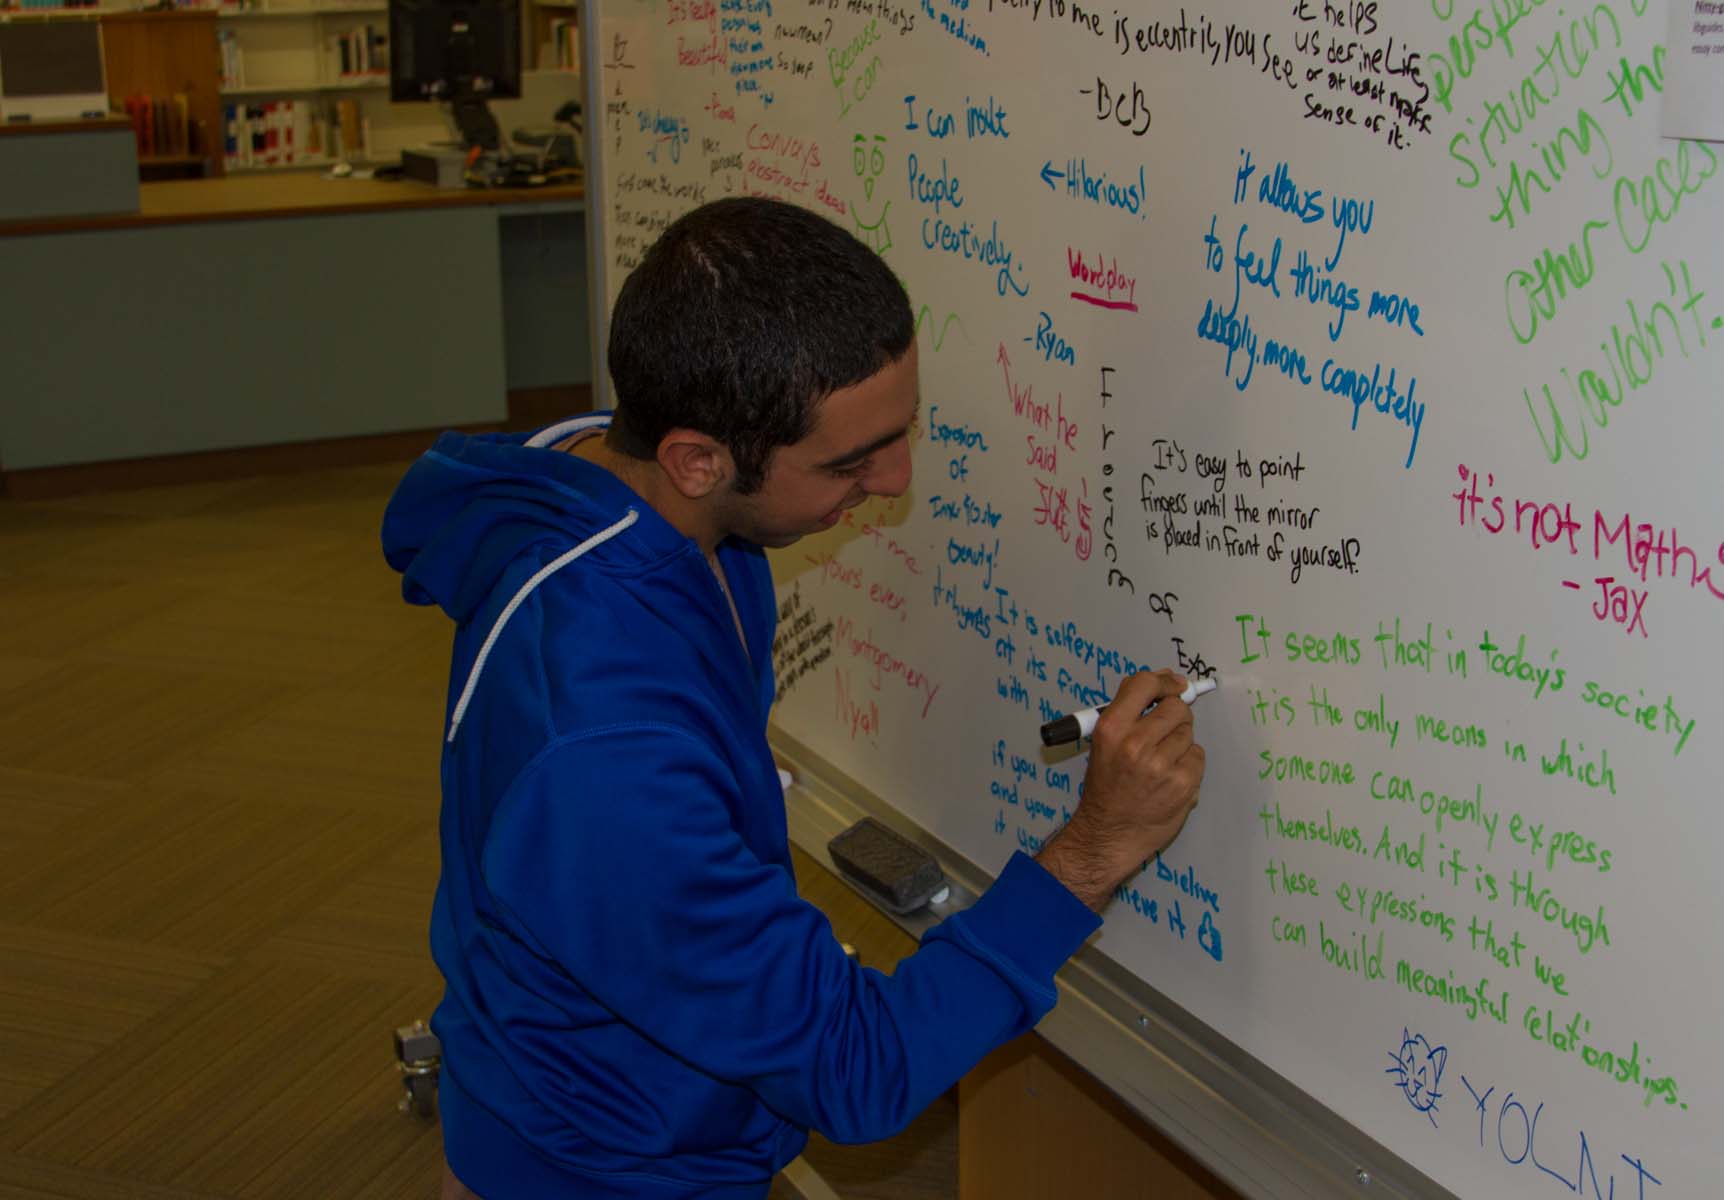 Pierce students use poetry whiteboard to express themselves